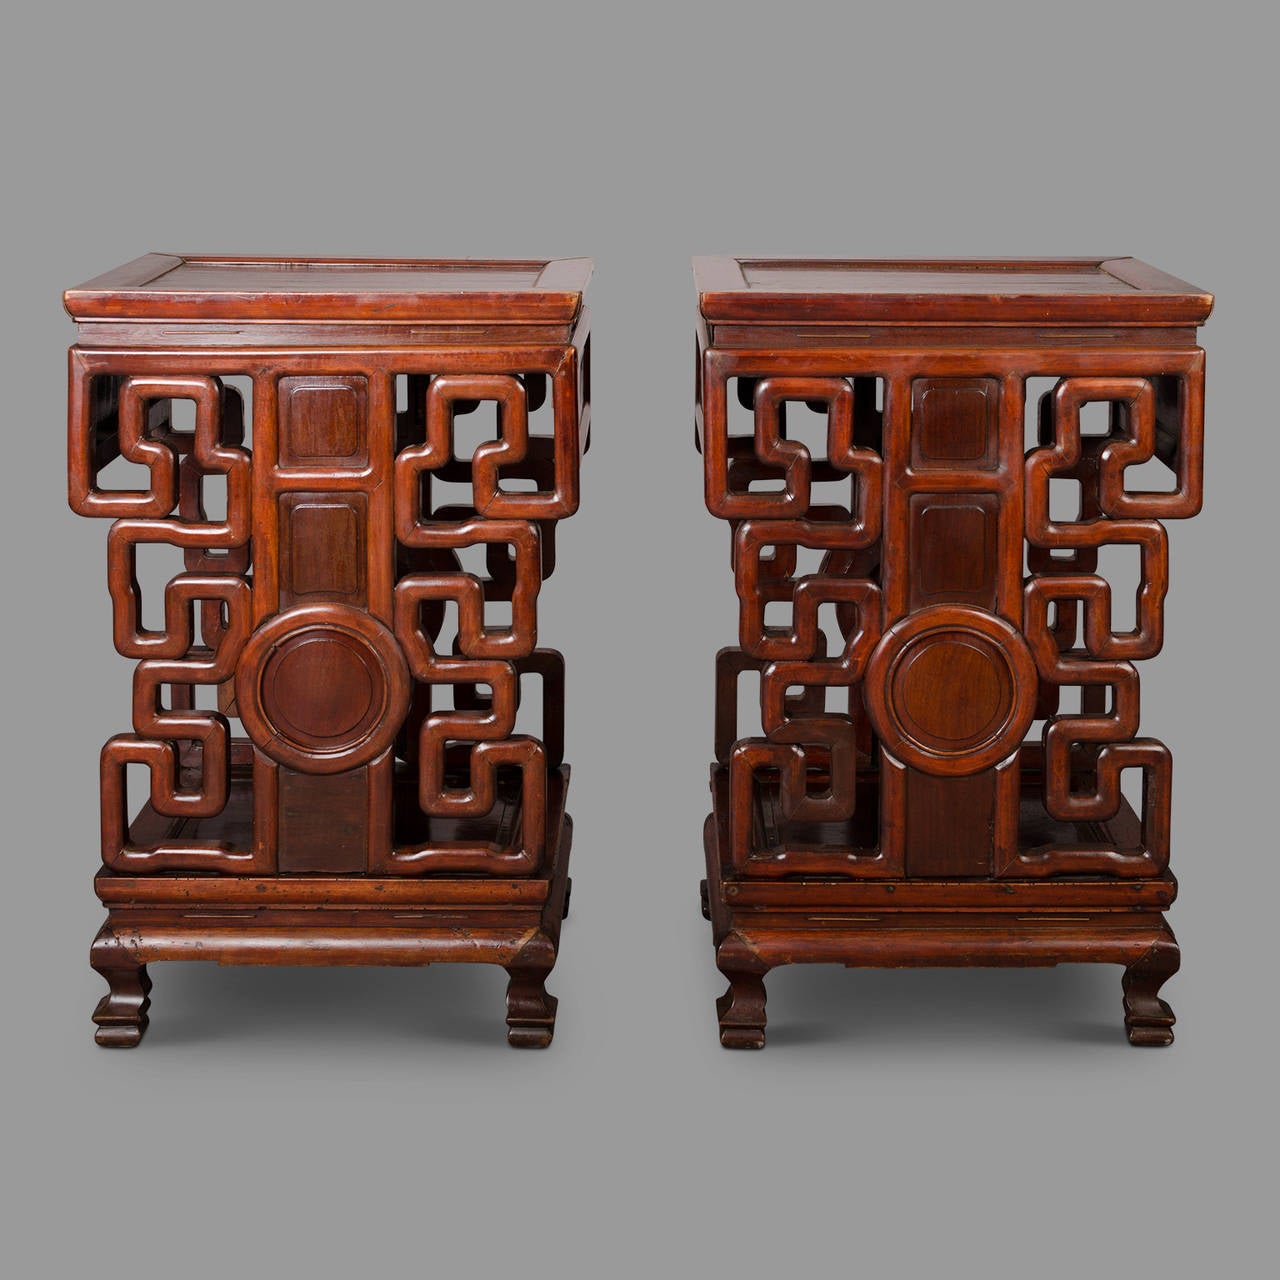 Double-sided middle consoles in solid mahogany with complex decor of openwork scrolls. Few visible restorations and small accidents. Beautiful patina.

Construction elements suggest the presence of a missing front drawer.